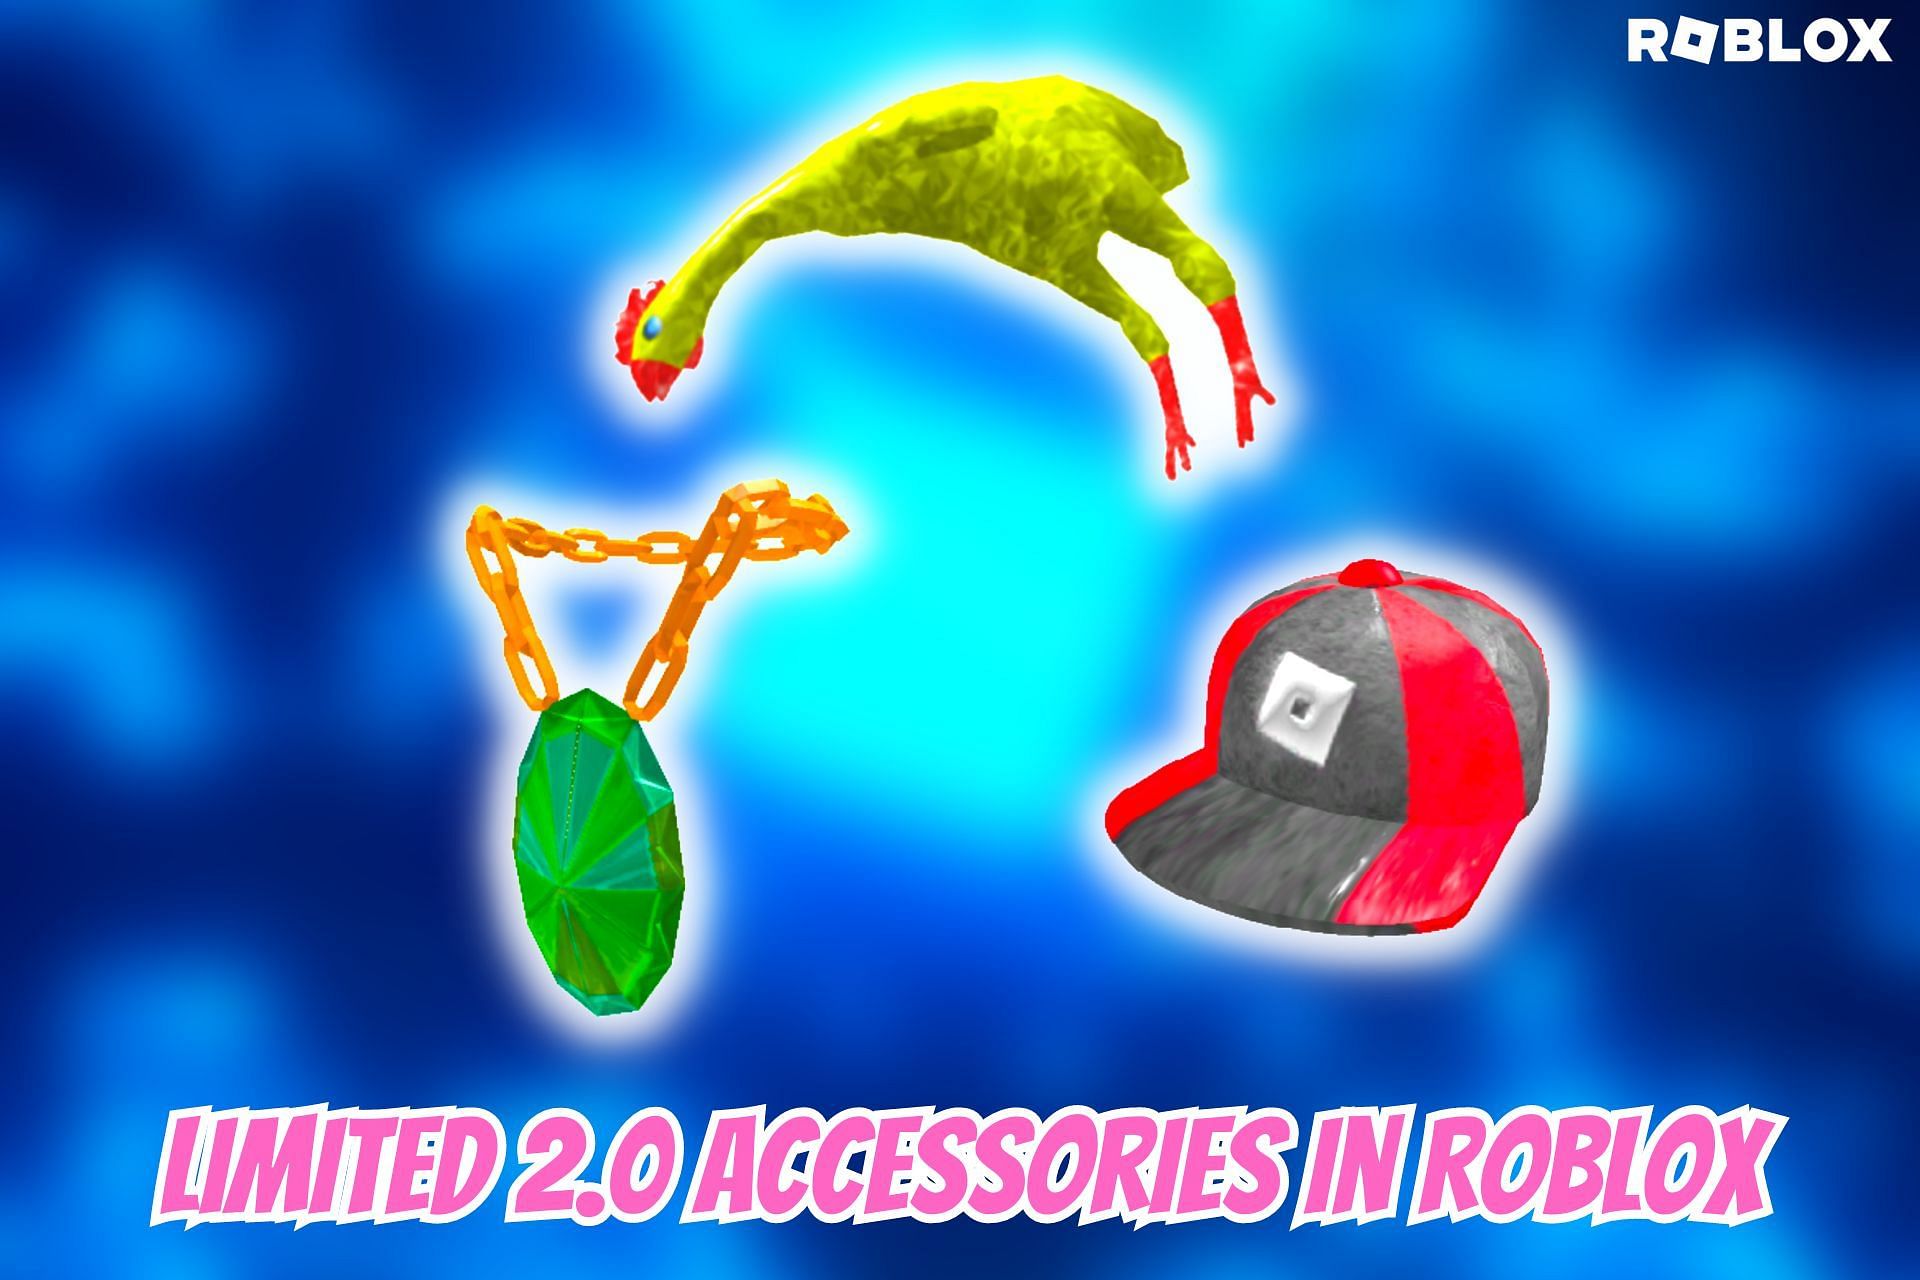 How To Make Roblox Accessories (Get Robux!) 